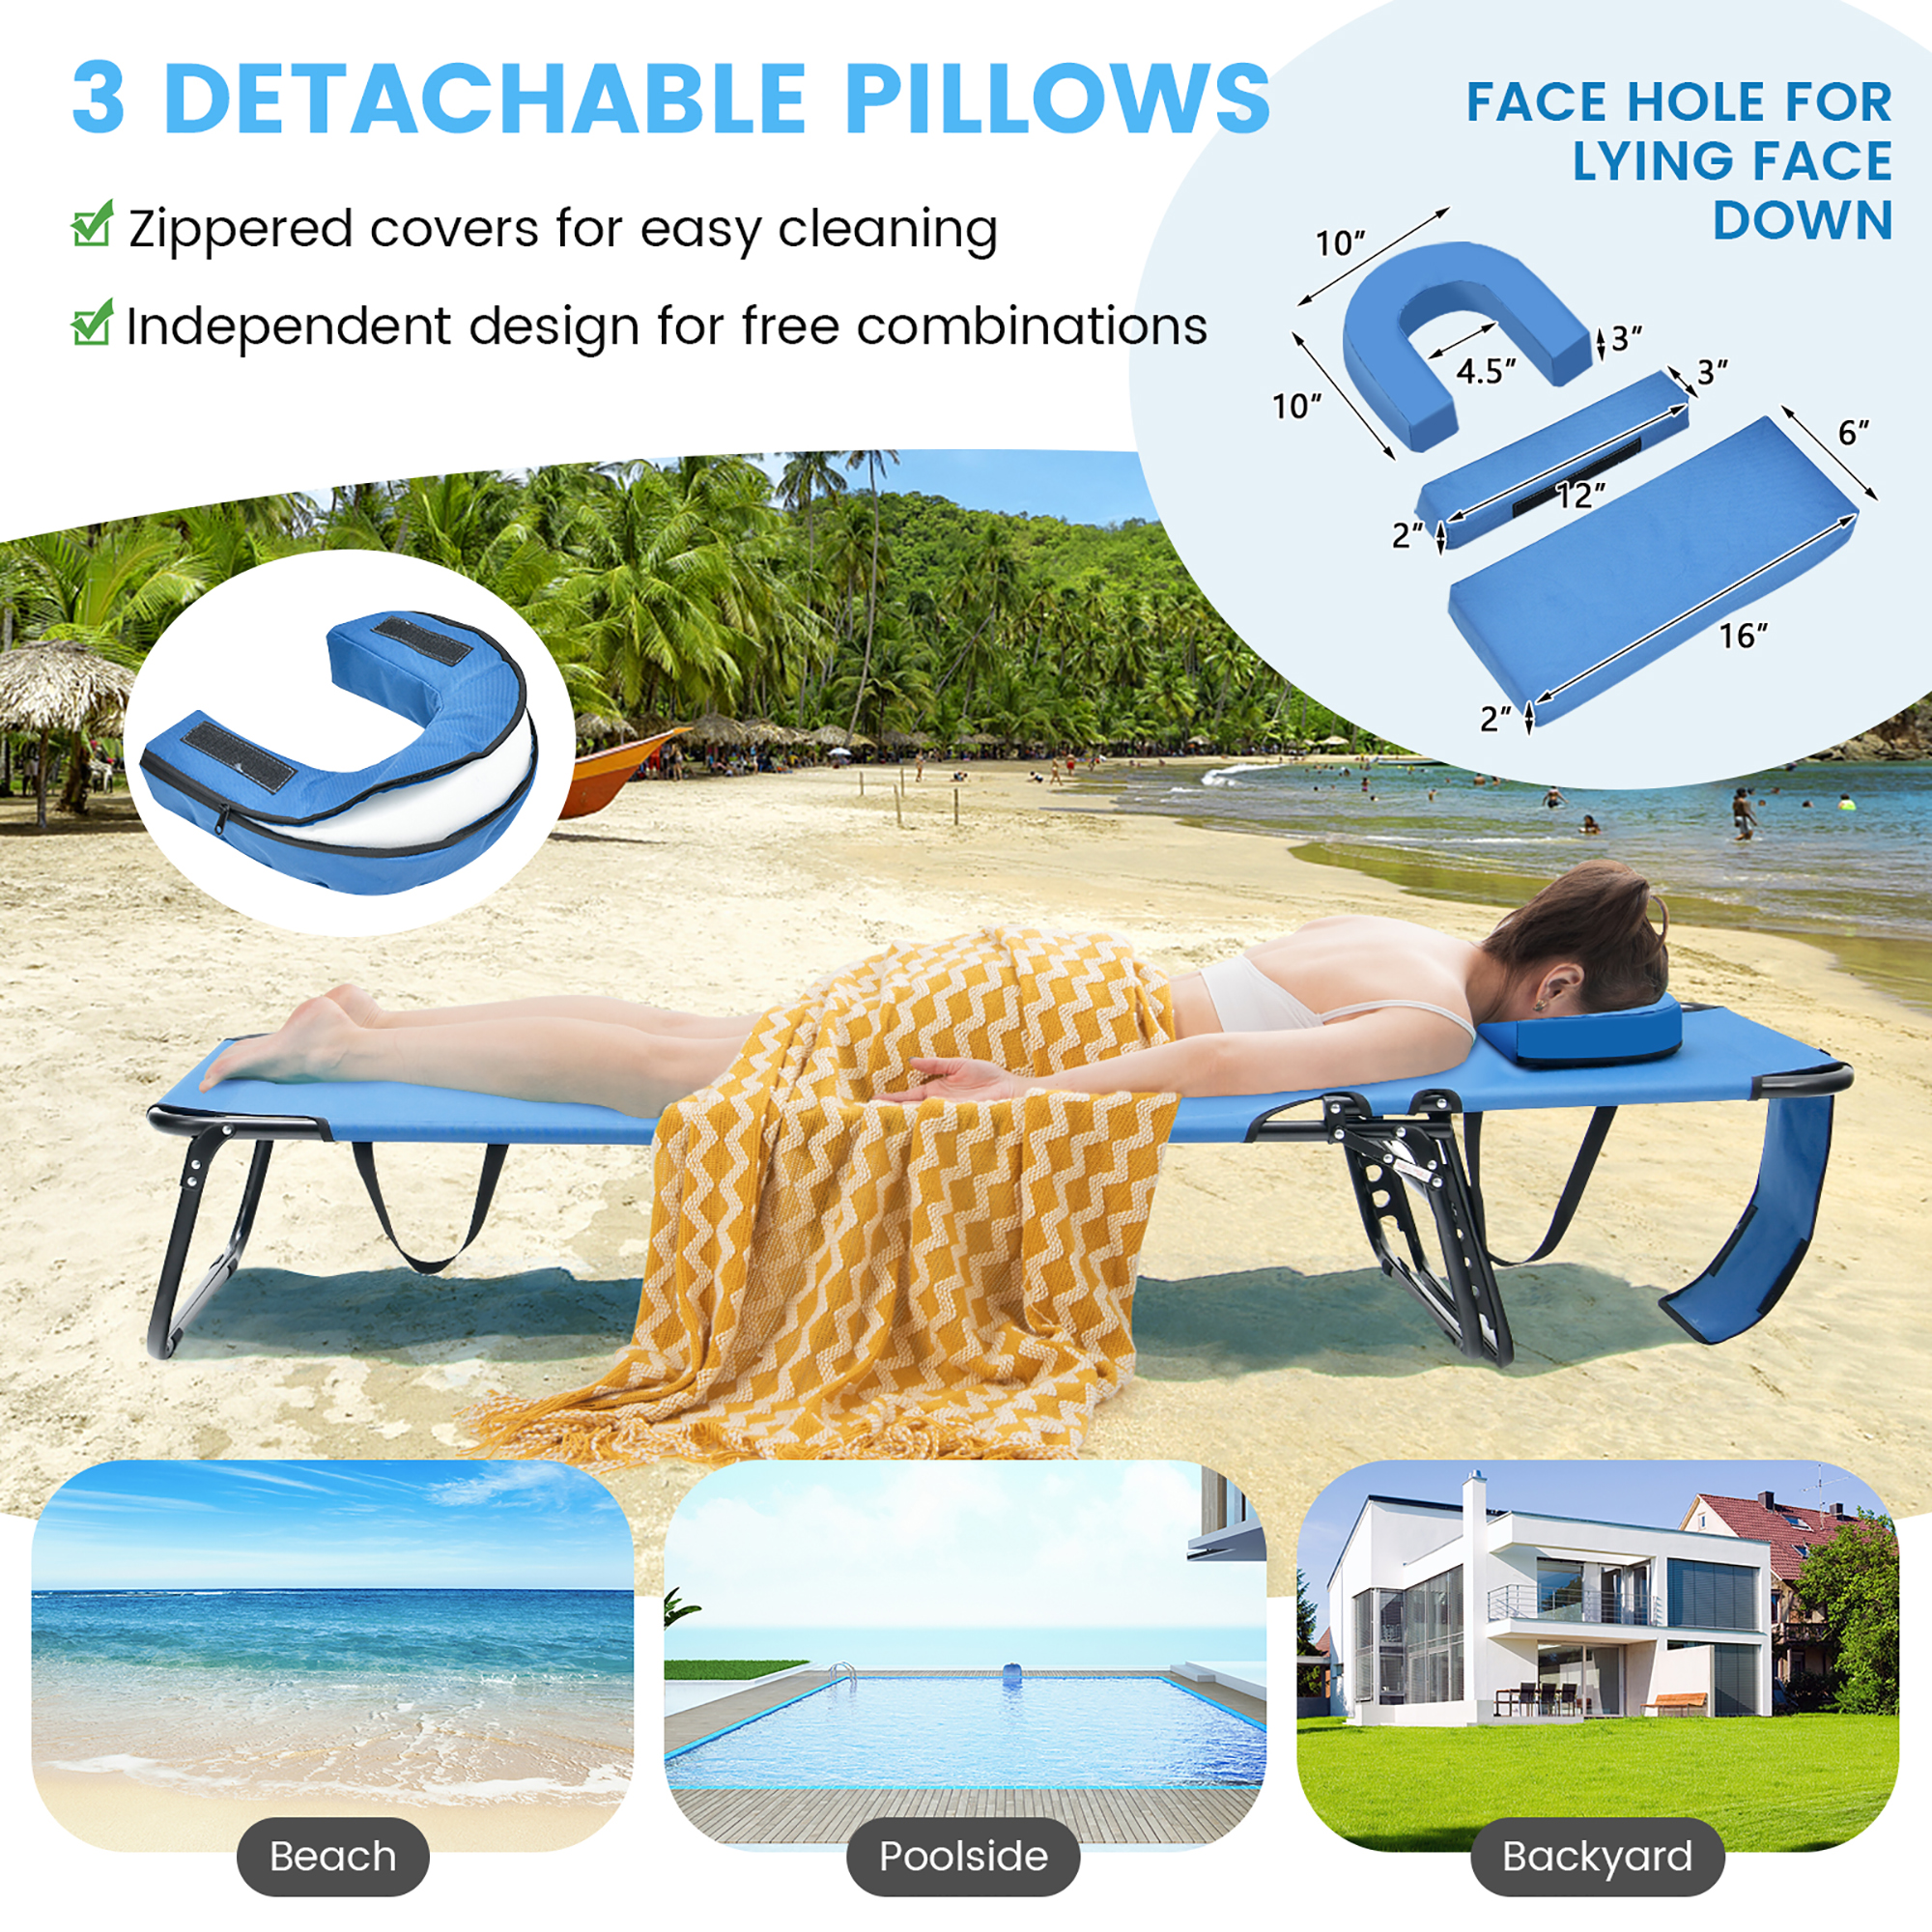 Costway Beach Chaise Lounge Chair with Face Hole Pillows & 5-Position Adjustable Backrest Blue - image 4 of 10